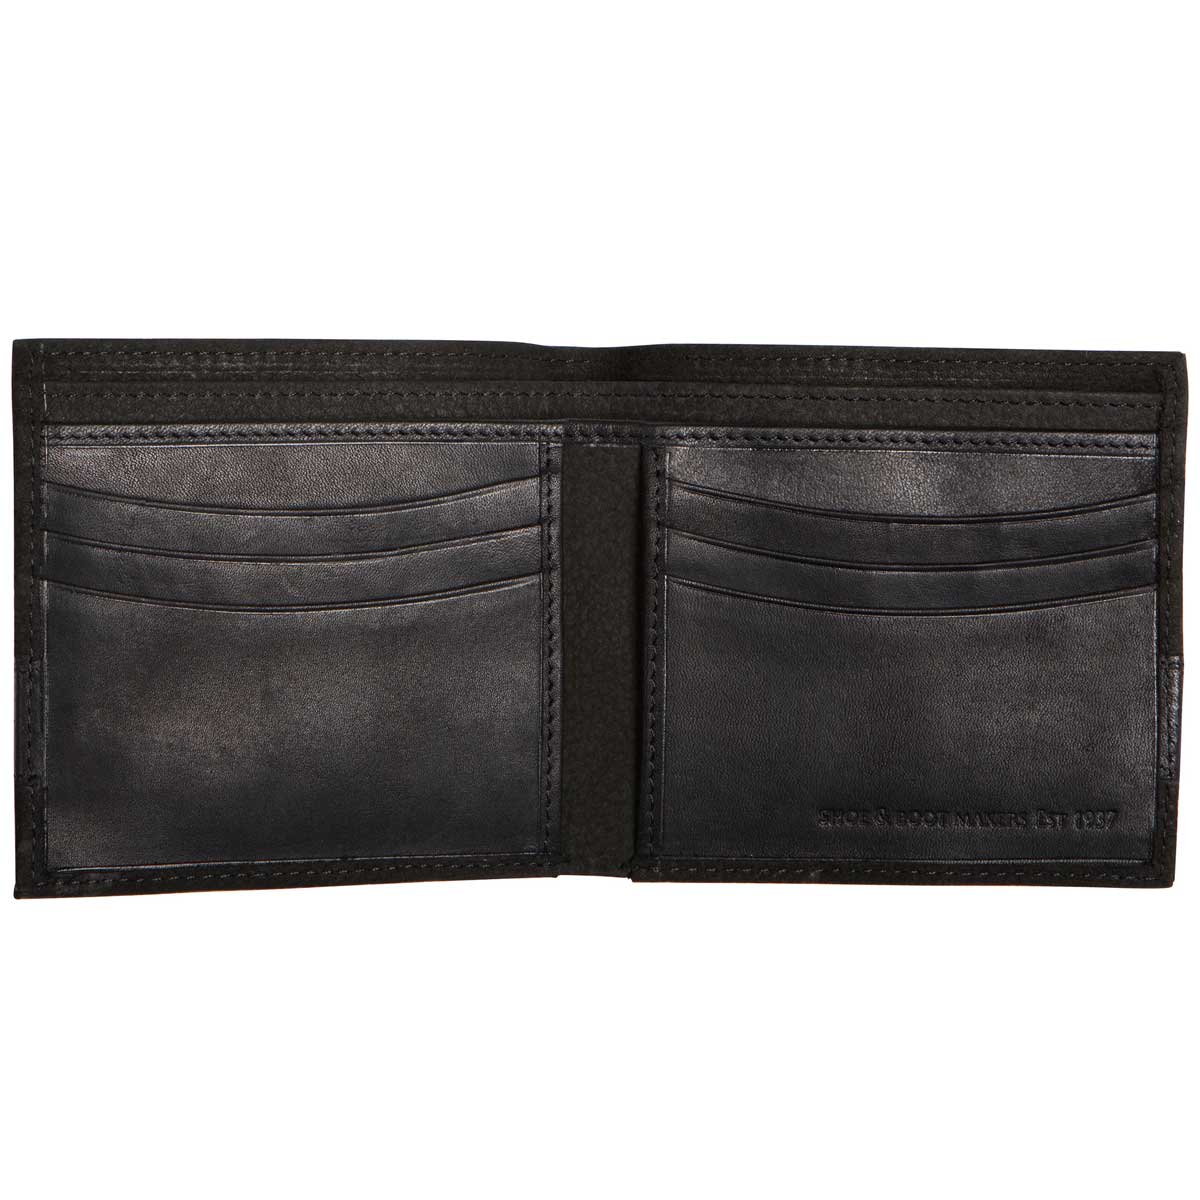 Dubarry Grafton Leather Wallet - Black - Mens Accessories